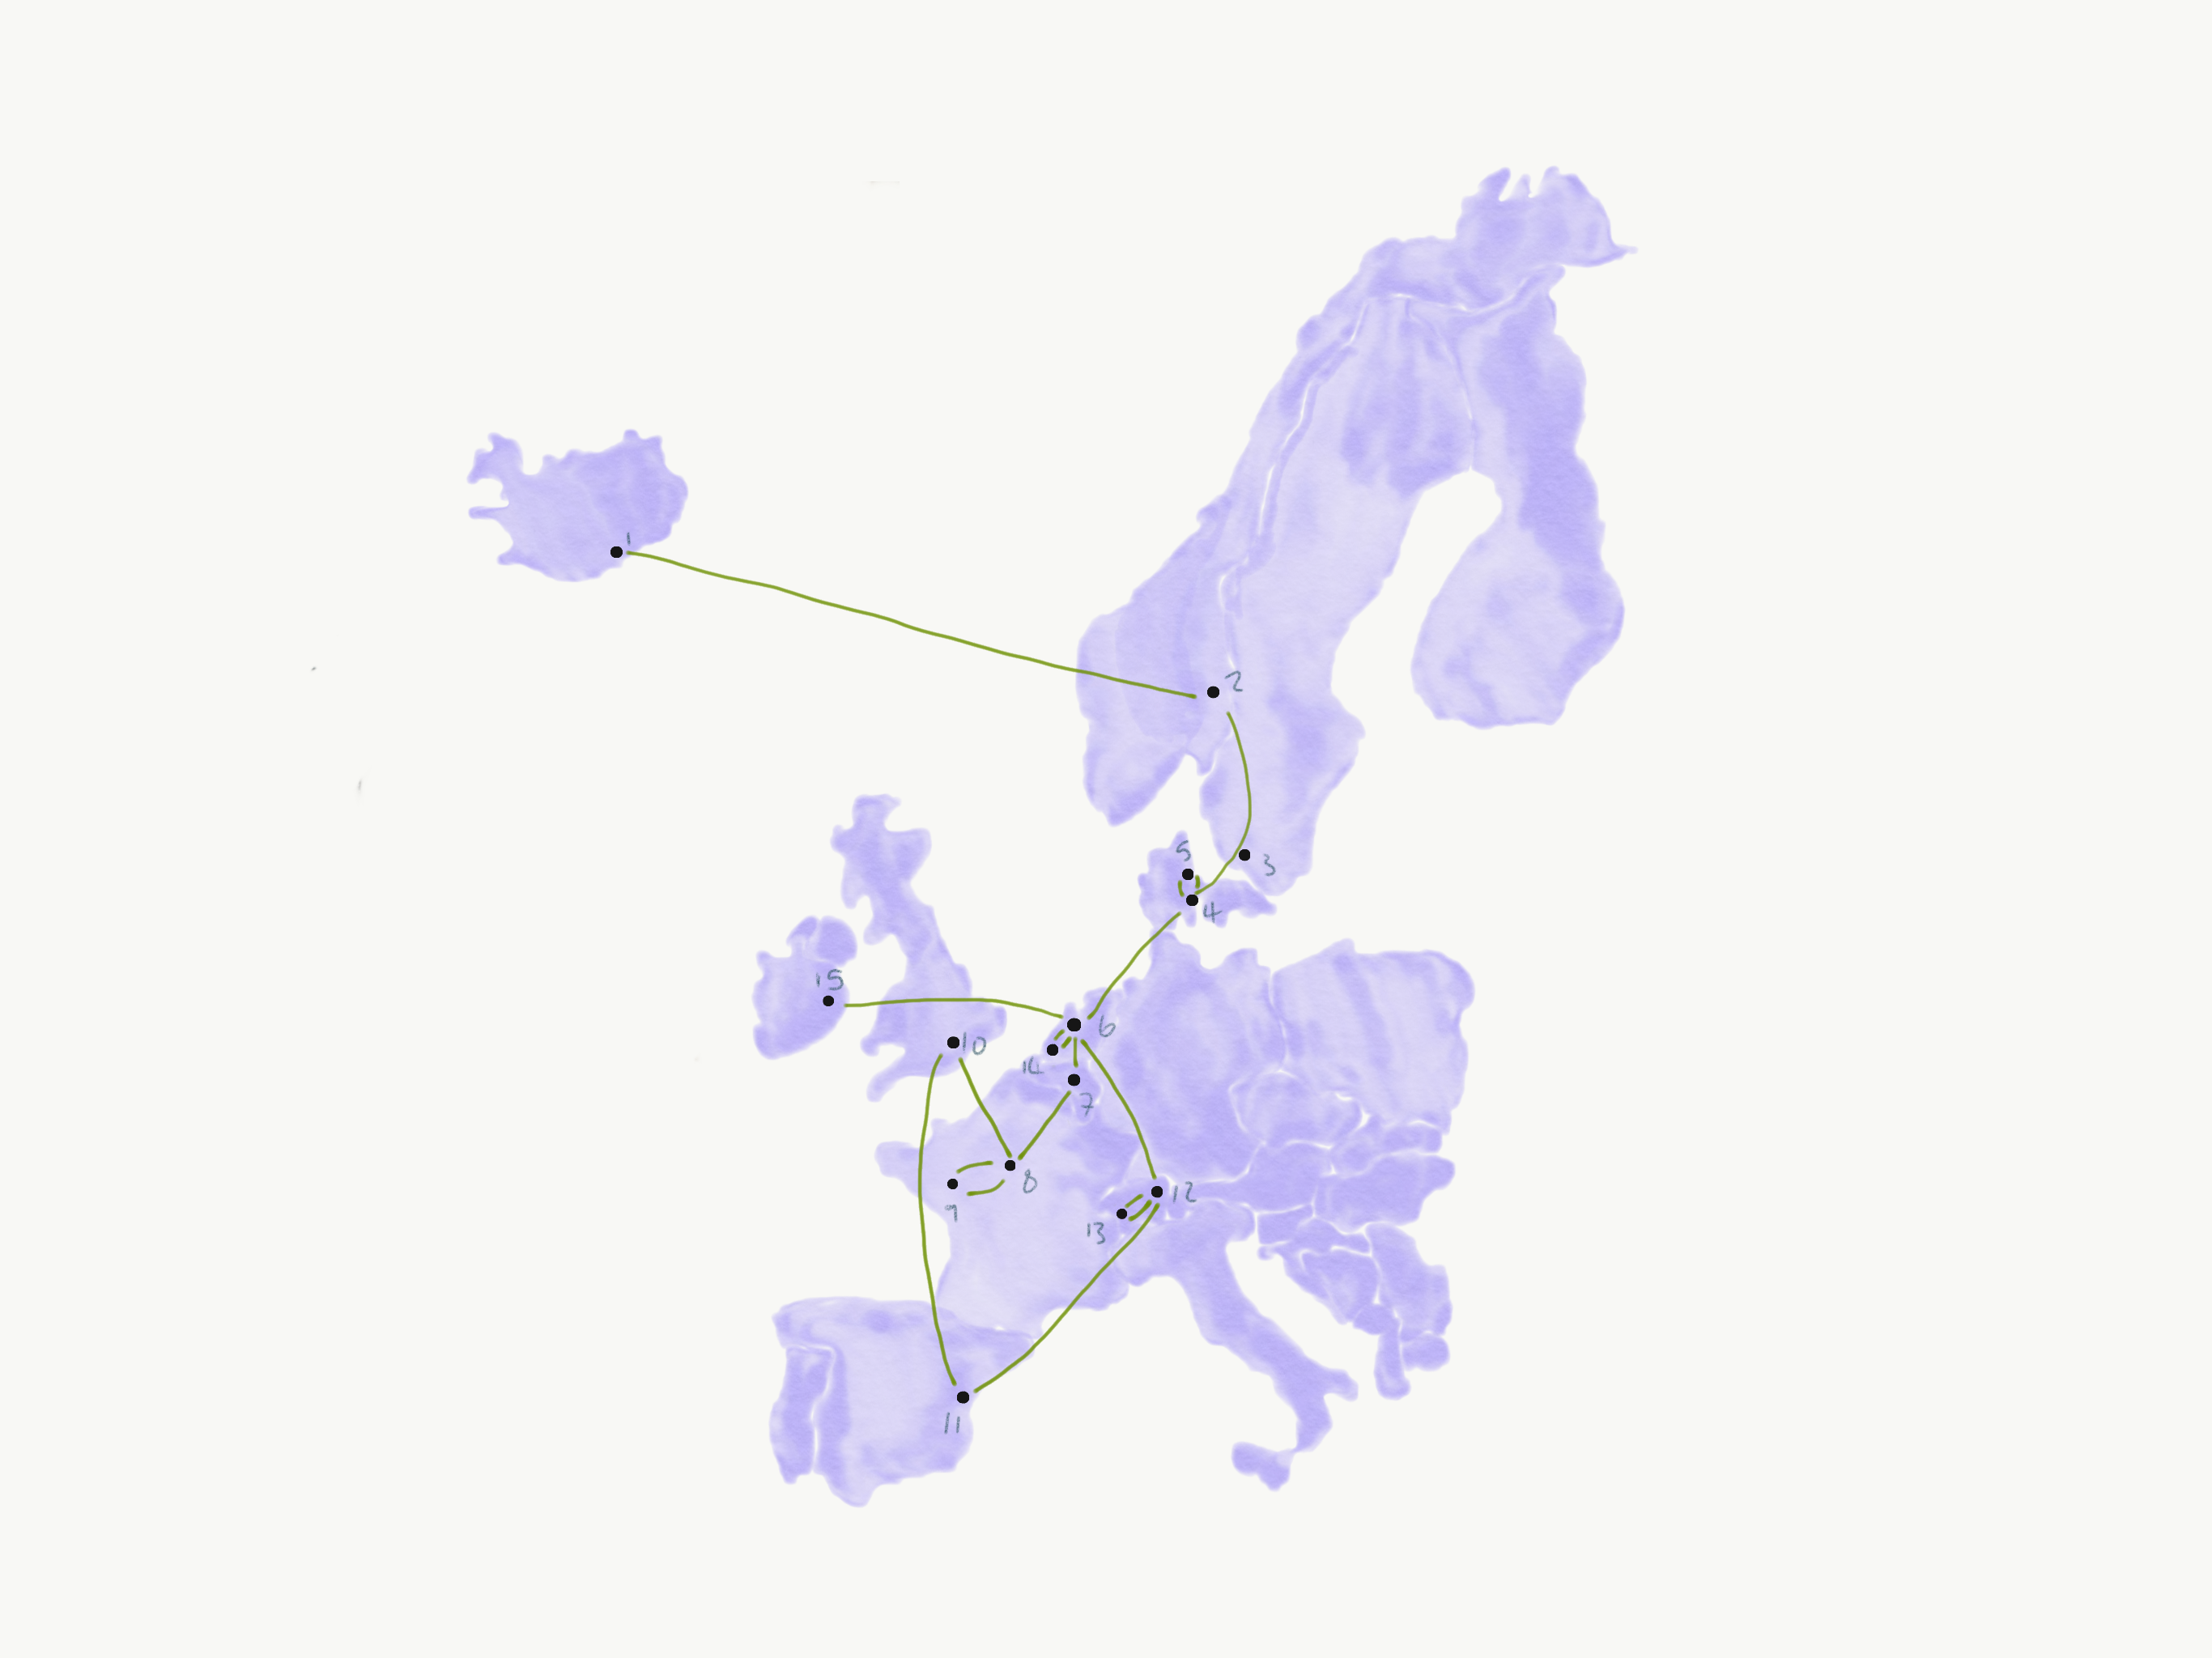 Outline of most countries in Western Europe and a flight path around them